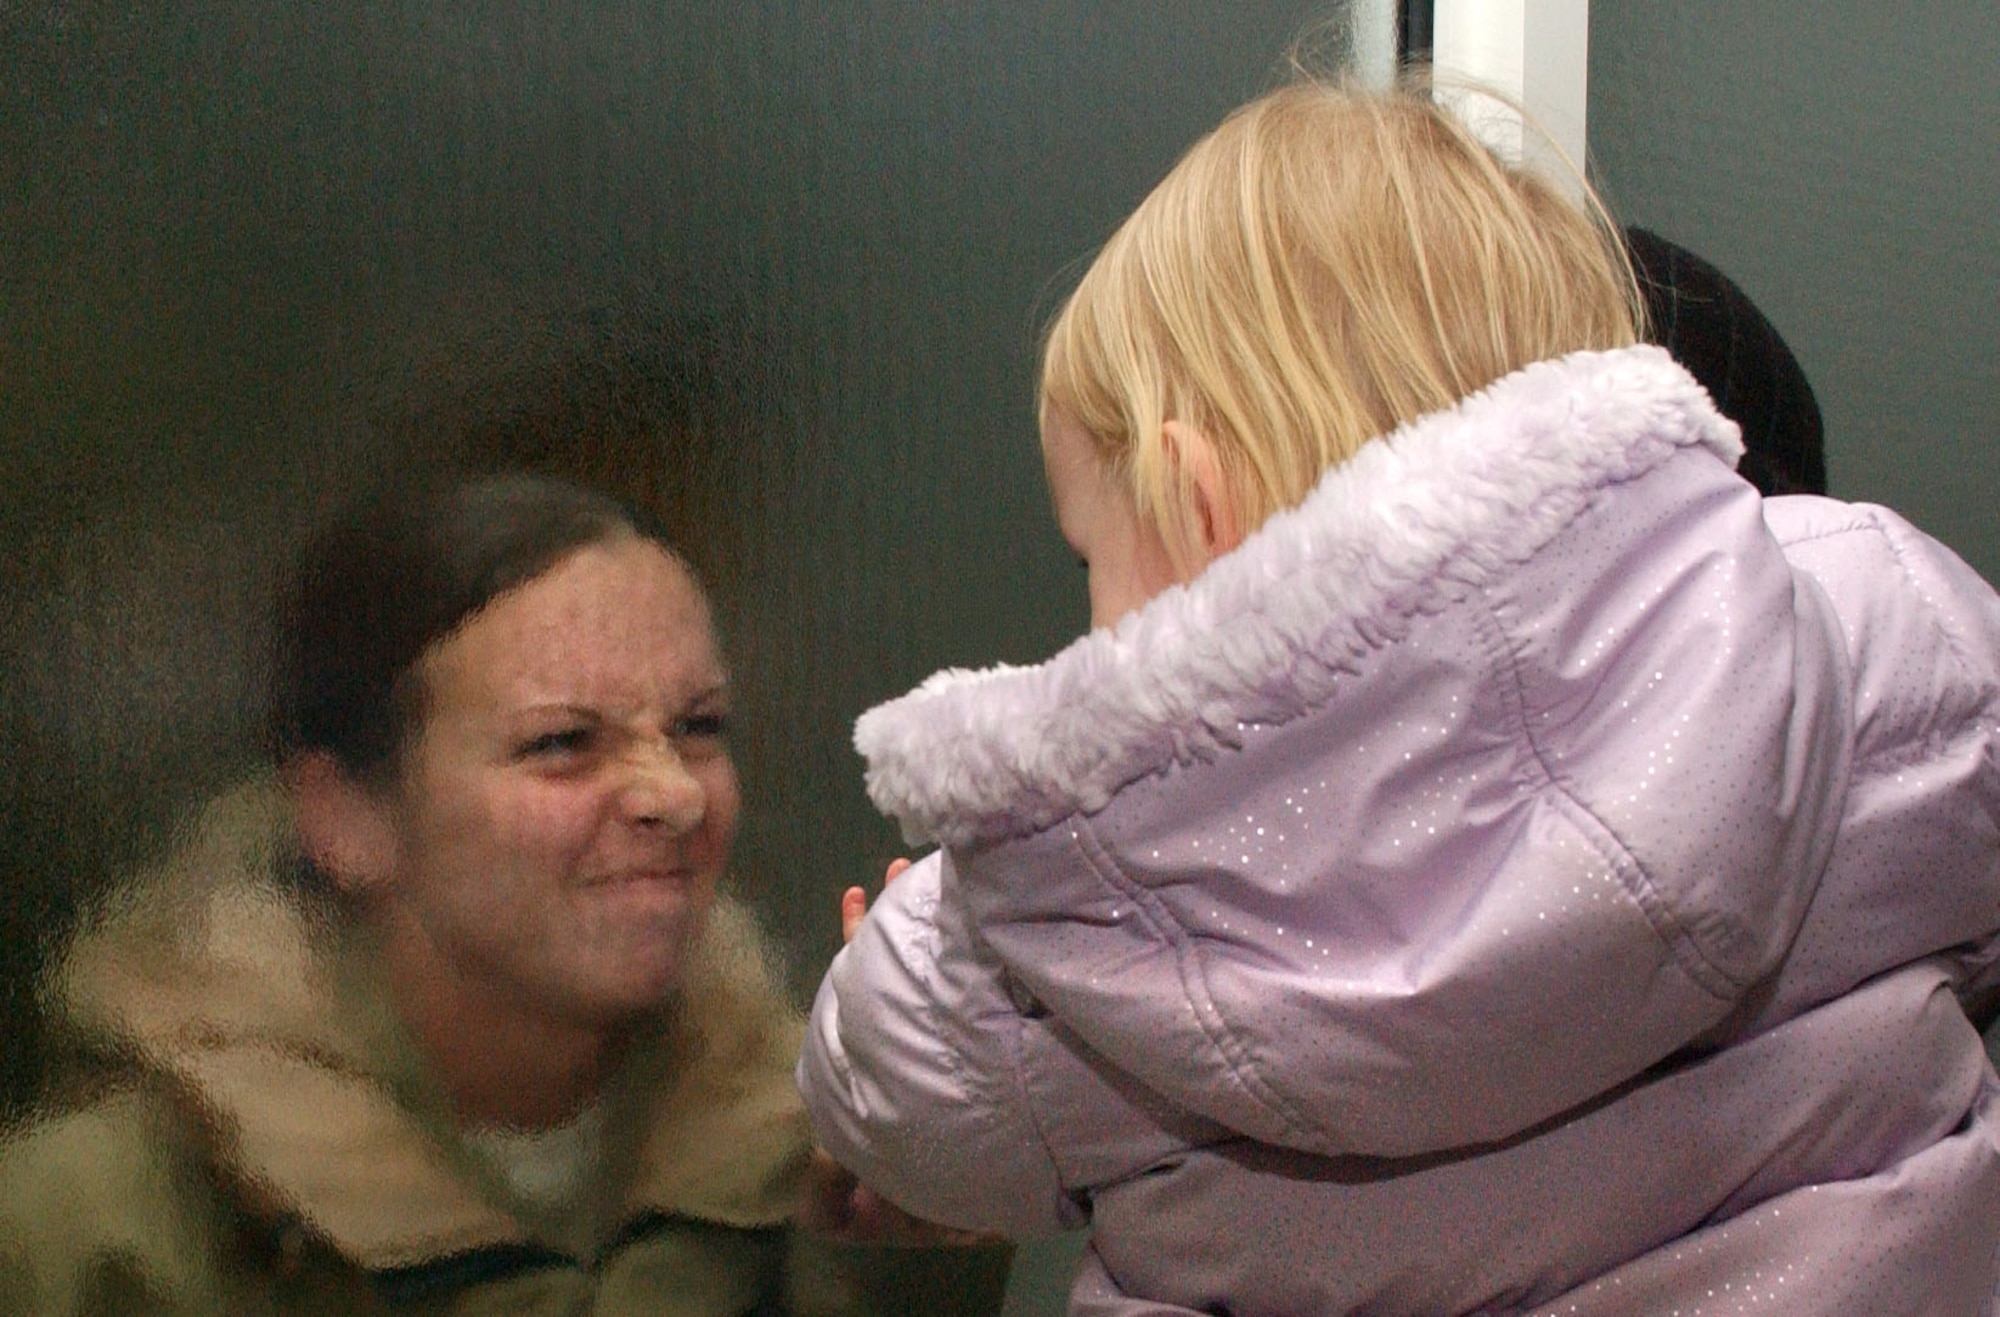 Happy to be home, Staff Sgt. Christy Coshenet, 100th Logistics Readiness Squadron, greets her daughter with a funny face through the frosted glass of the RAF Mildenhall passenger terminal Jan. 11, after returning from a 6-month deployment to Southwest Asia. (U.S. Air Force photo by Staff Sgt. Tyrona Pearsall)